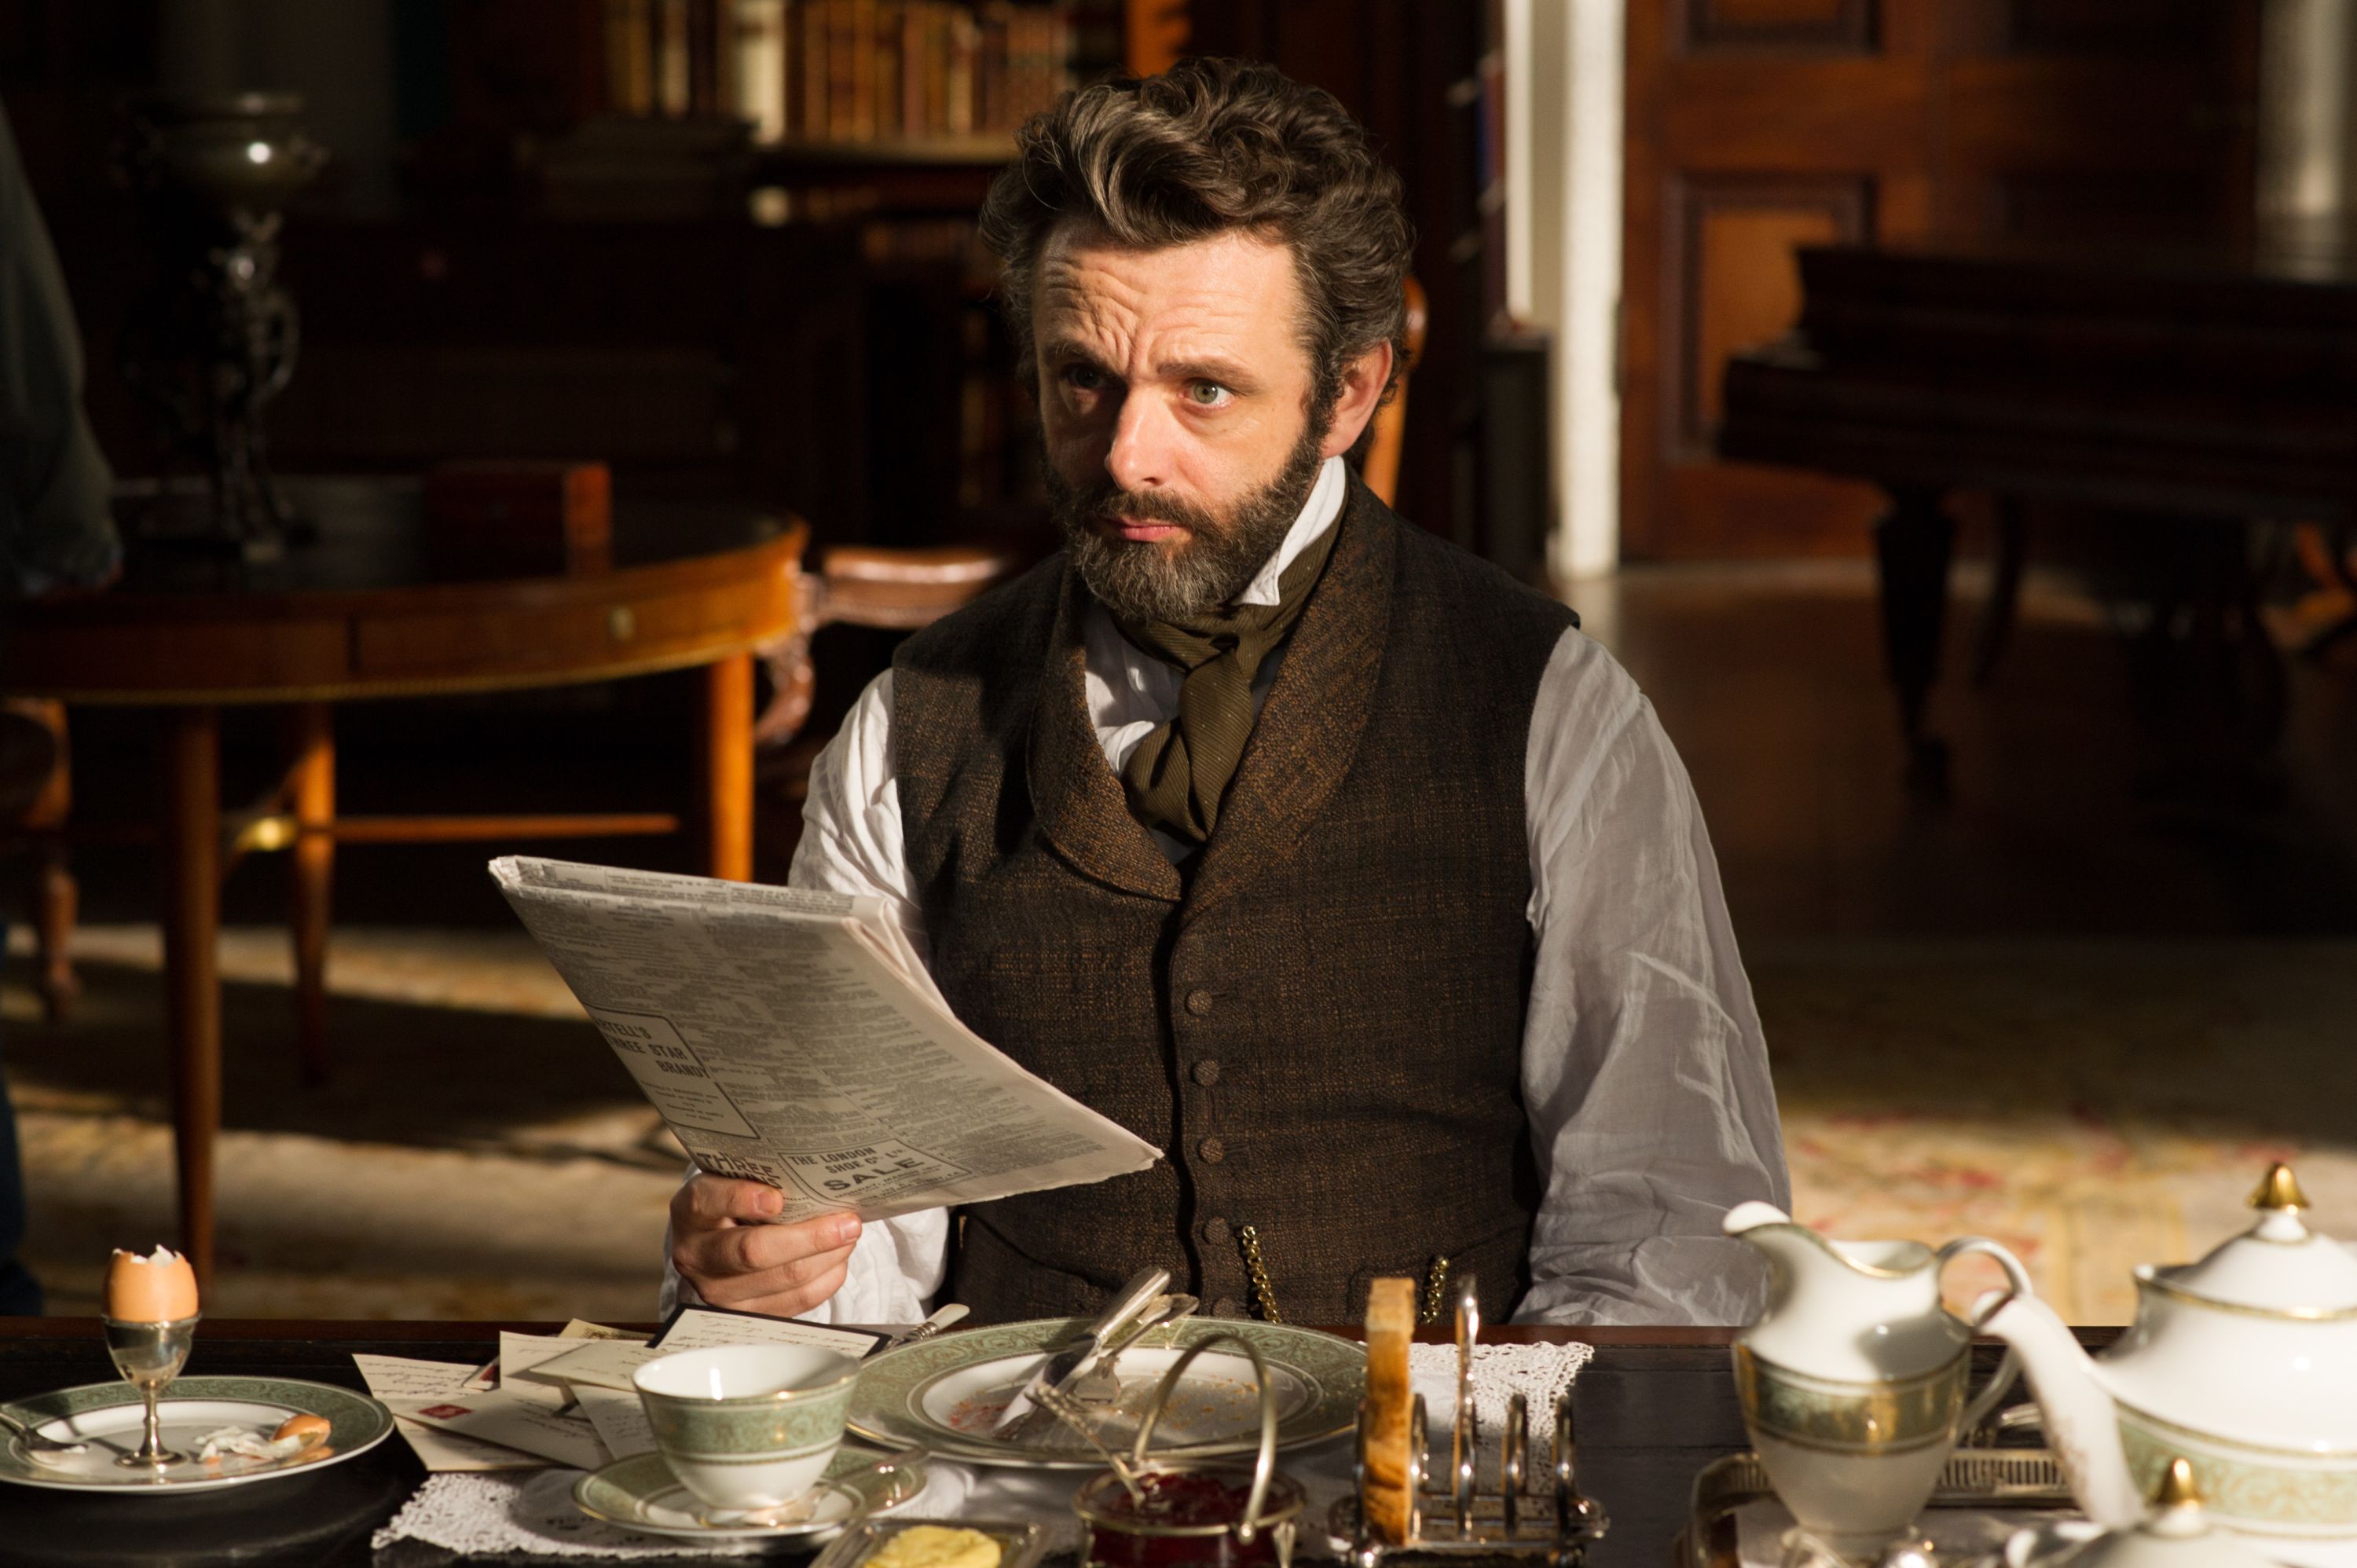 Michael Sheen in "Far From the Madding Crowd"